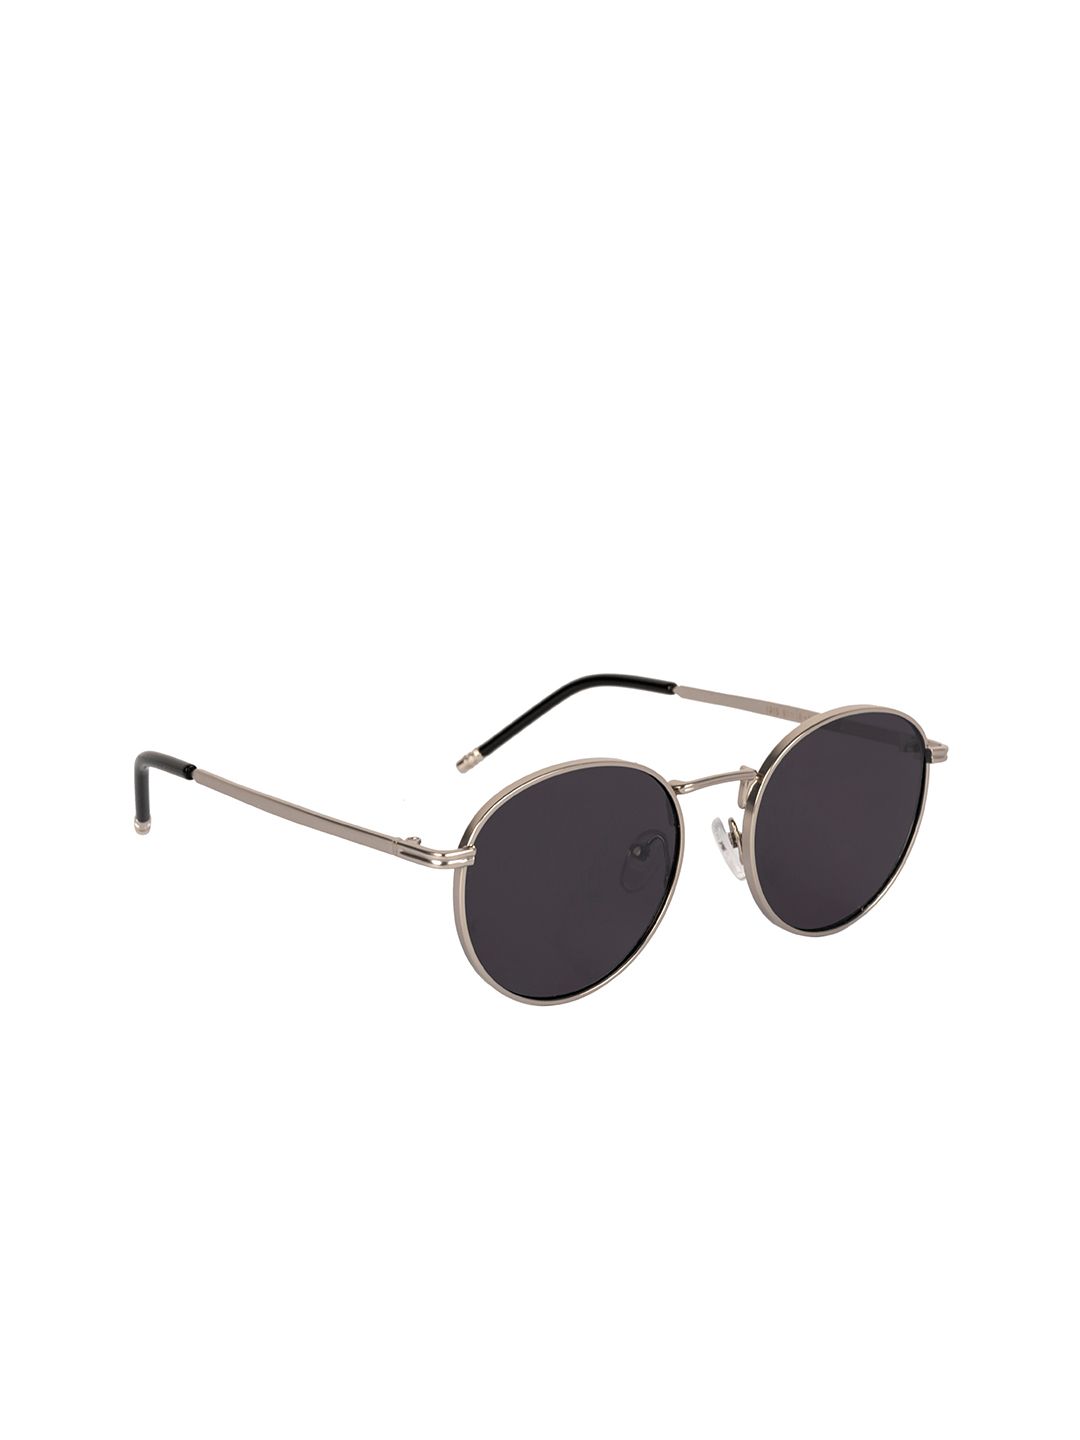 Voyage Unisex Black Lens & Silver-Toned Round Sunglasses with UV Protected Lens 1915MG3622 Price in India